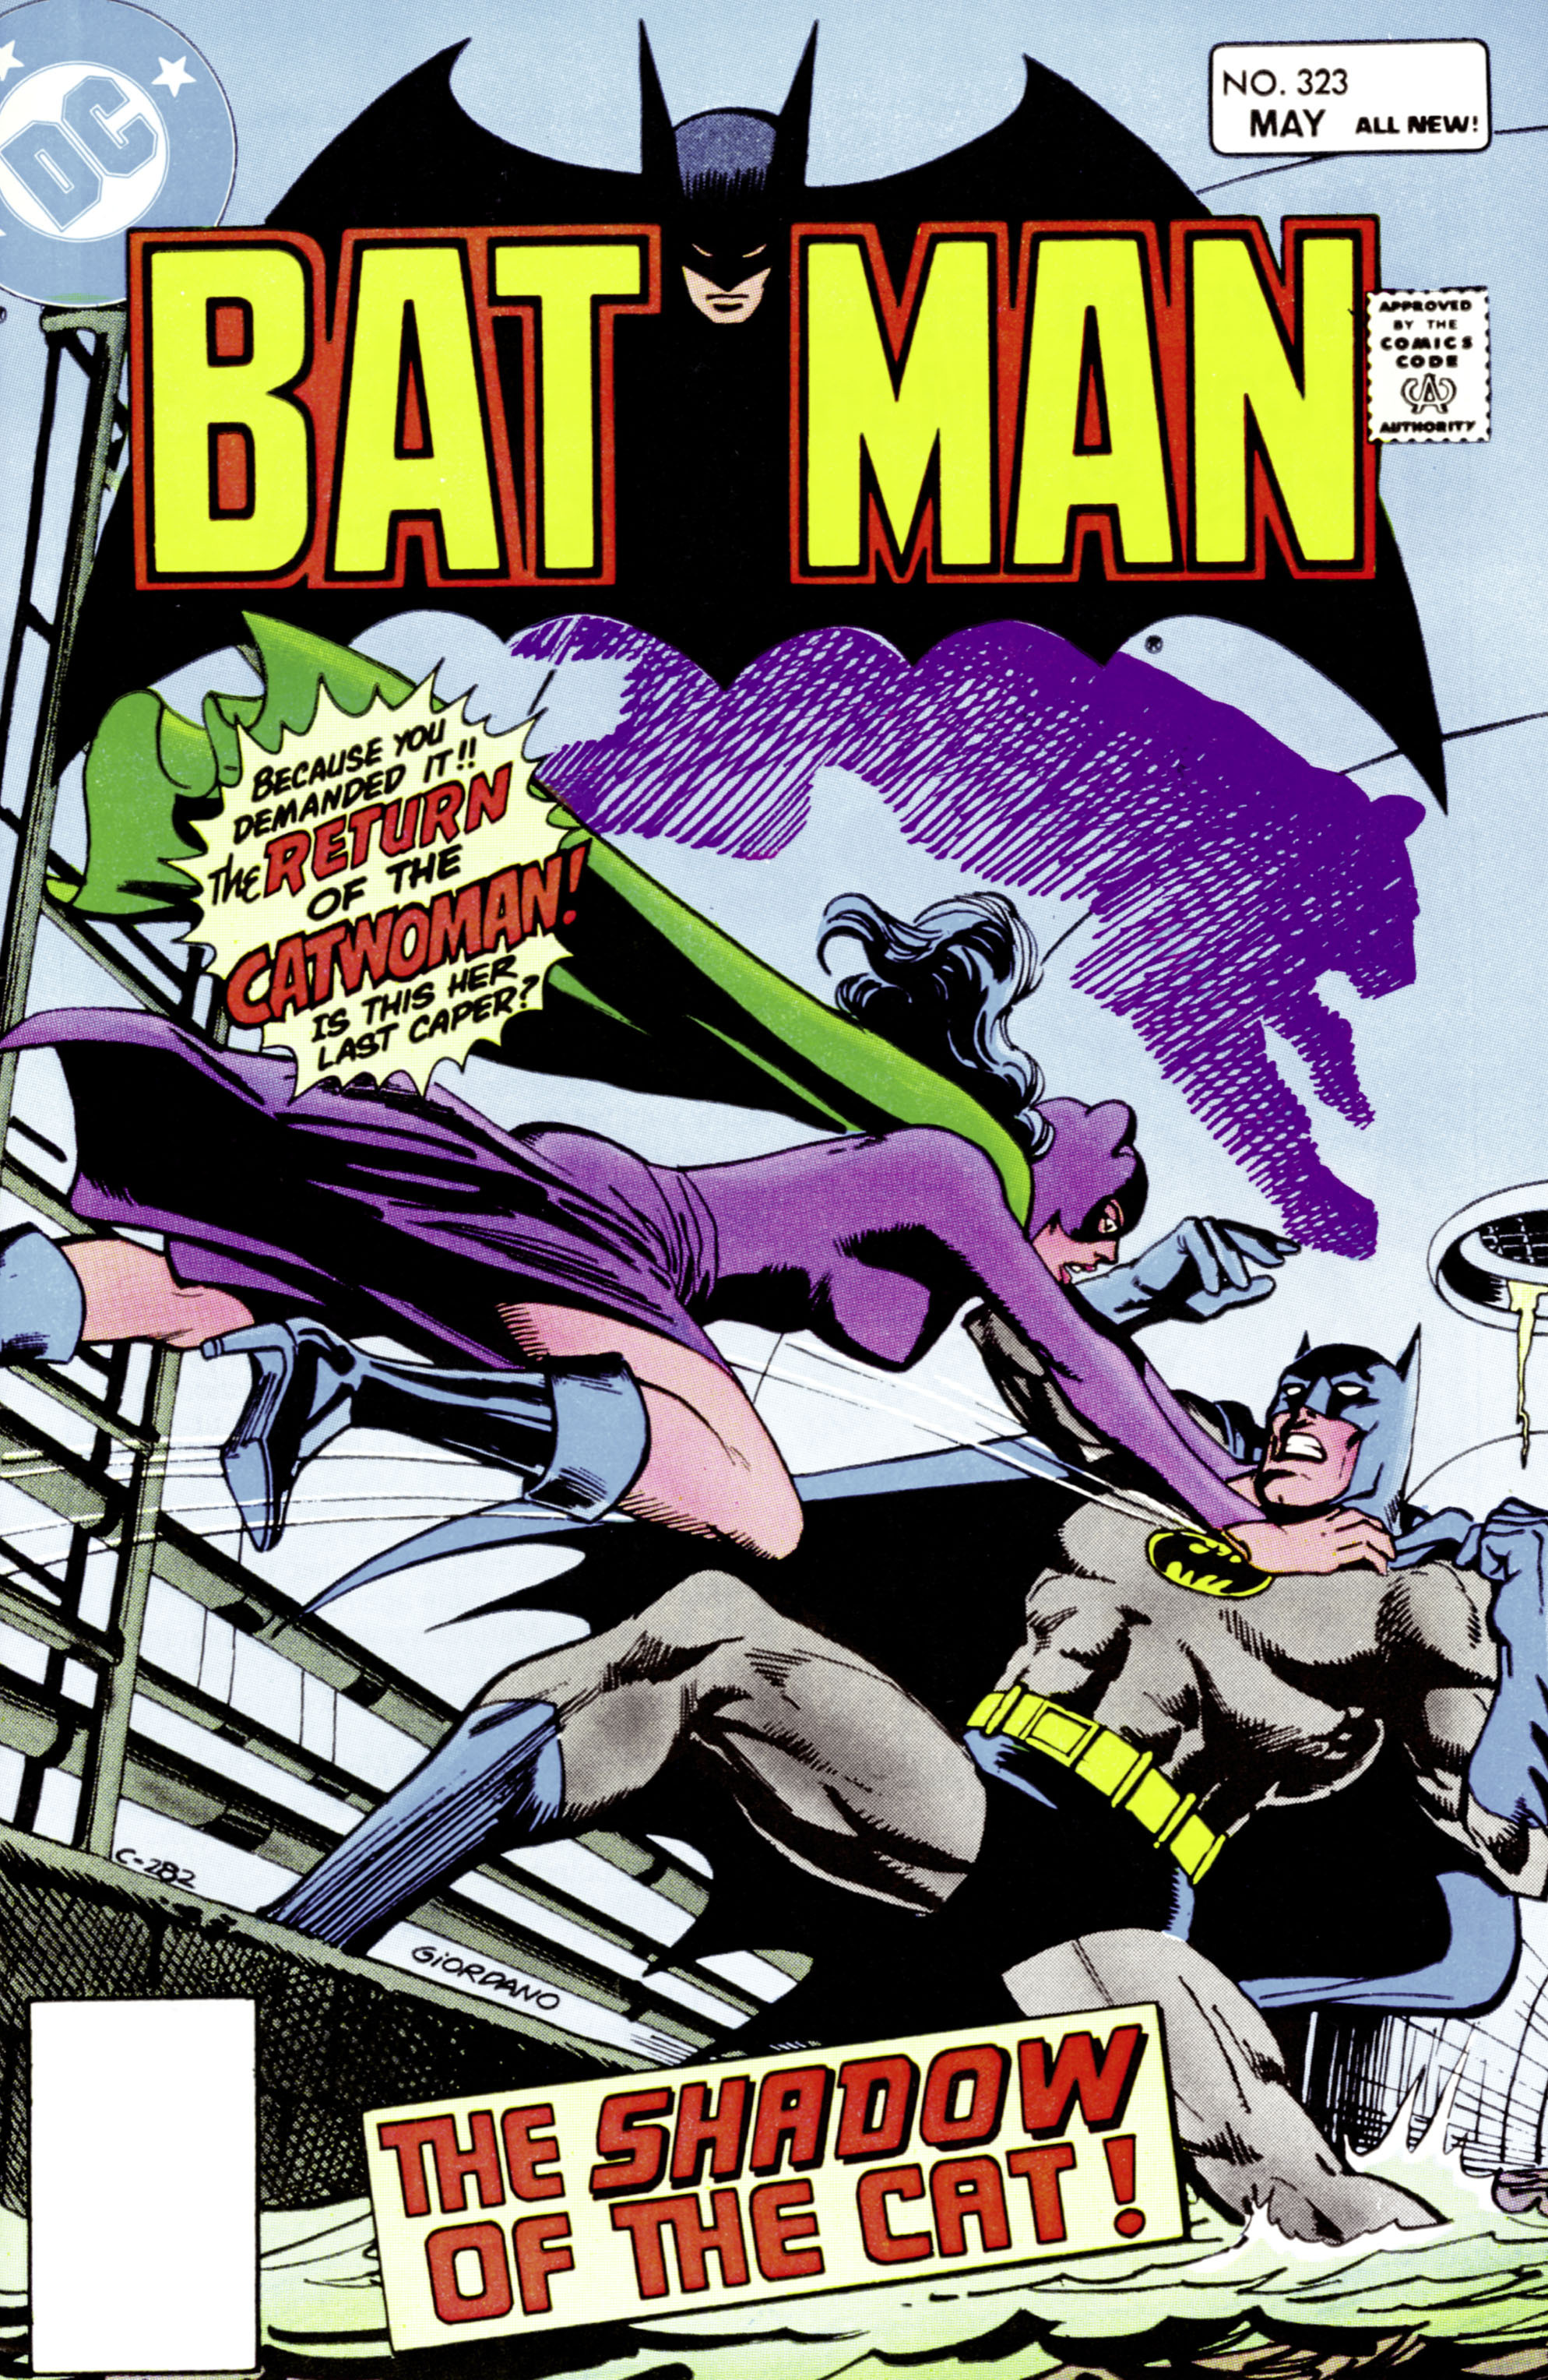 Batman 1940 Issue 323 | Read Batman 1940 Issue 323 comic online in high  quality. Read Full Comic online for free - Read comics online in high  quality .| READ COMIC ONLINE